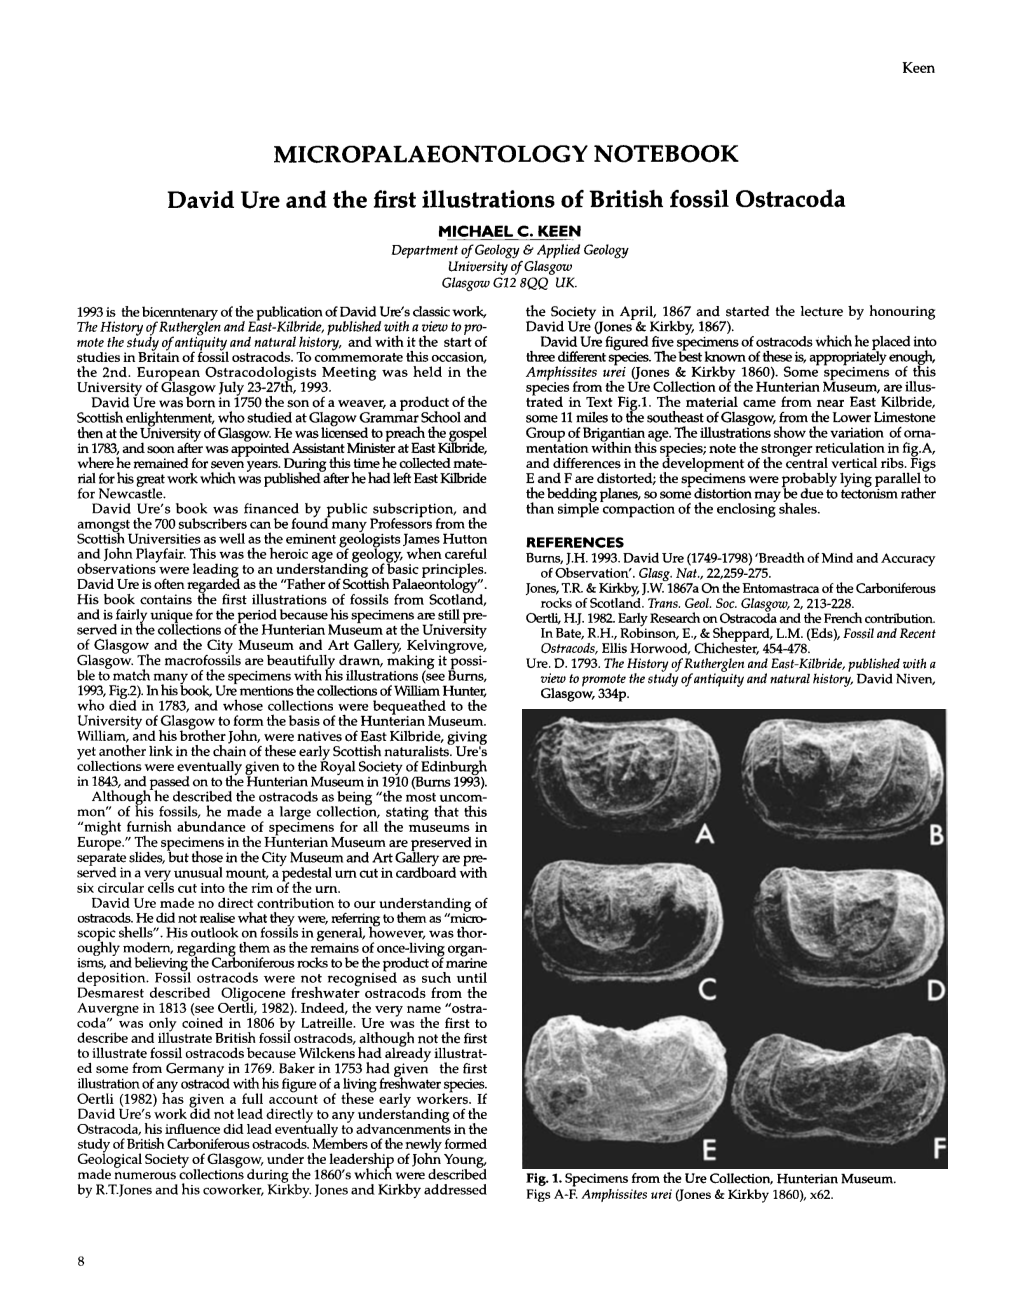 David Ure and the First Illustrations of British Fossil Ostracoda MICHAEL C